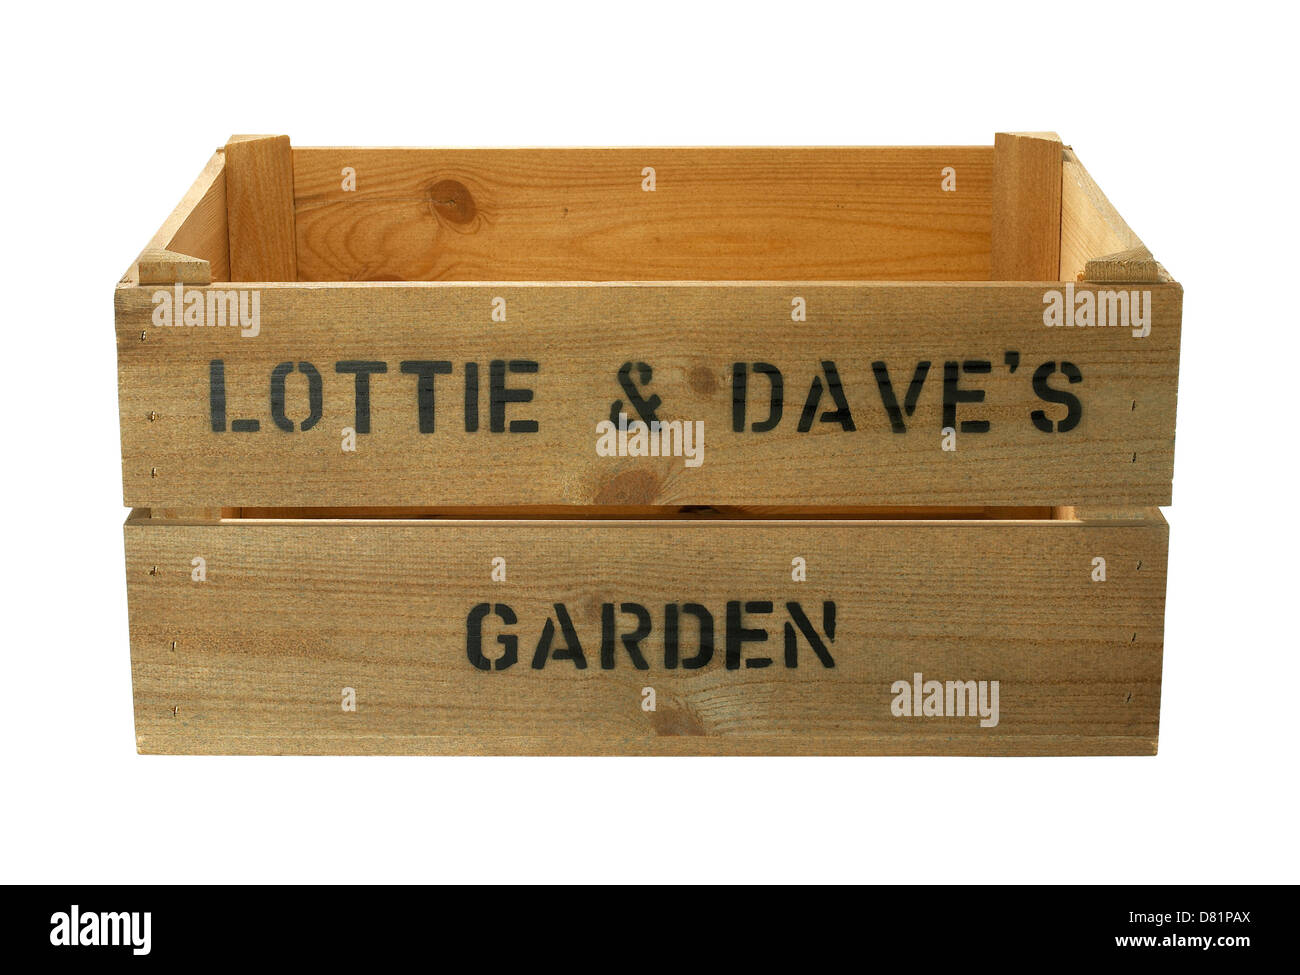 lottie and dave's garden wooden vegetable box cut out onto a white background Stock Photo